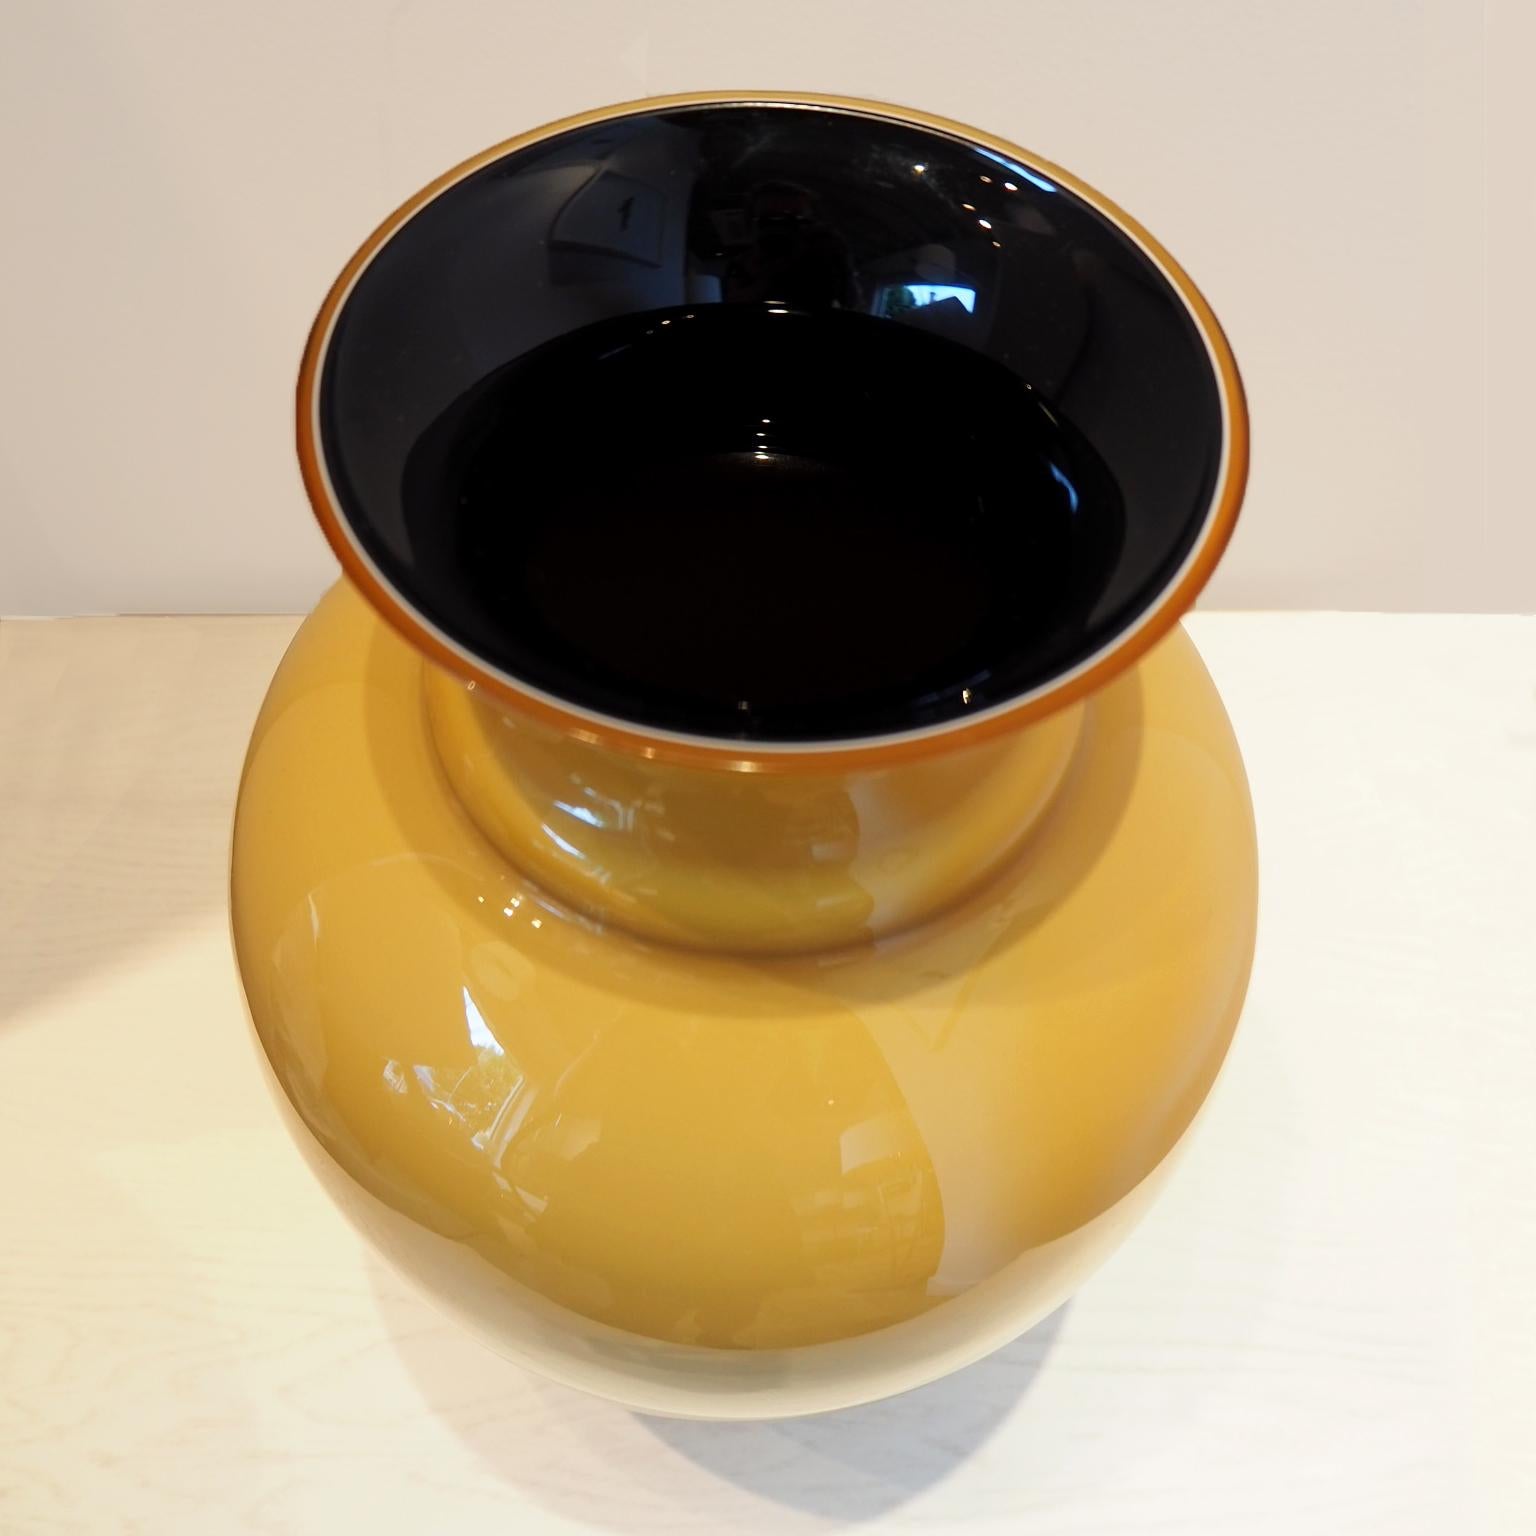 Murano glass vase in mustard colour with black contrasting colour inside.

26Dia x 36H cm

Good vintage condition